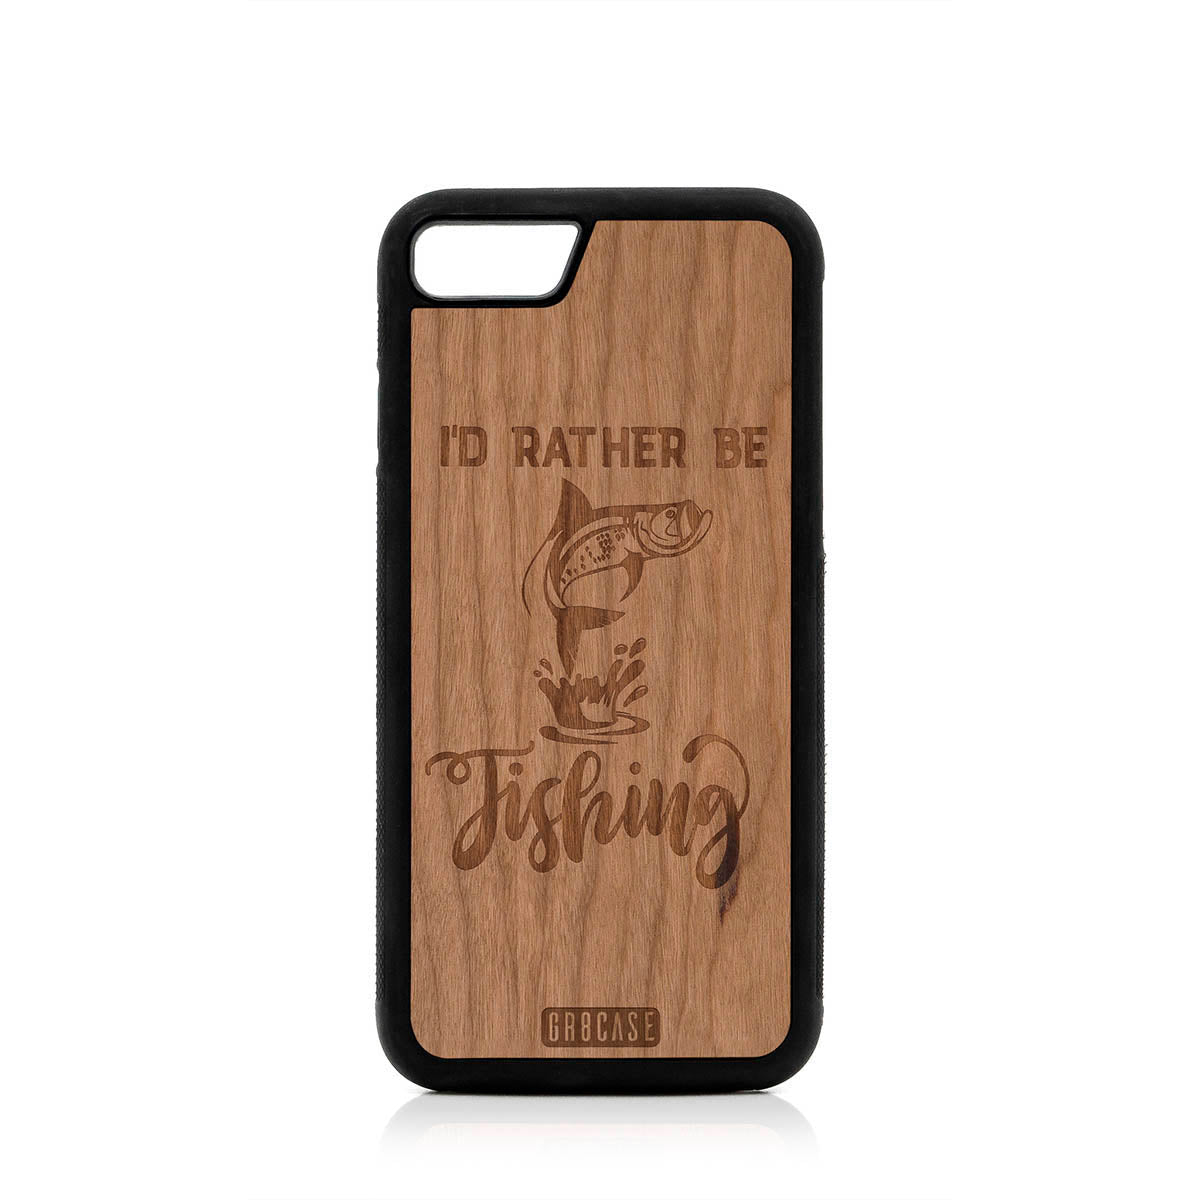 I'D Rather Be Fishing Design Wood Case For iPhone SE 2020